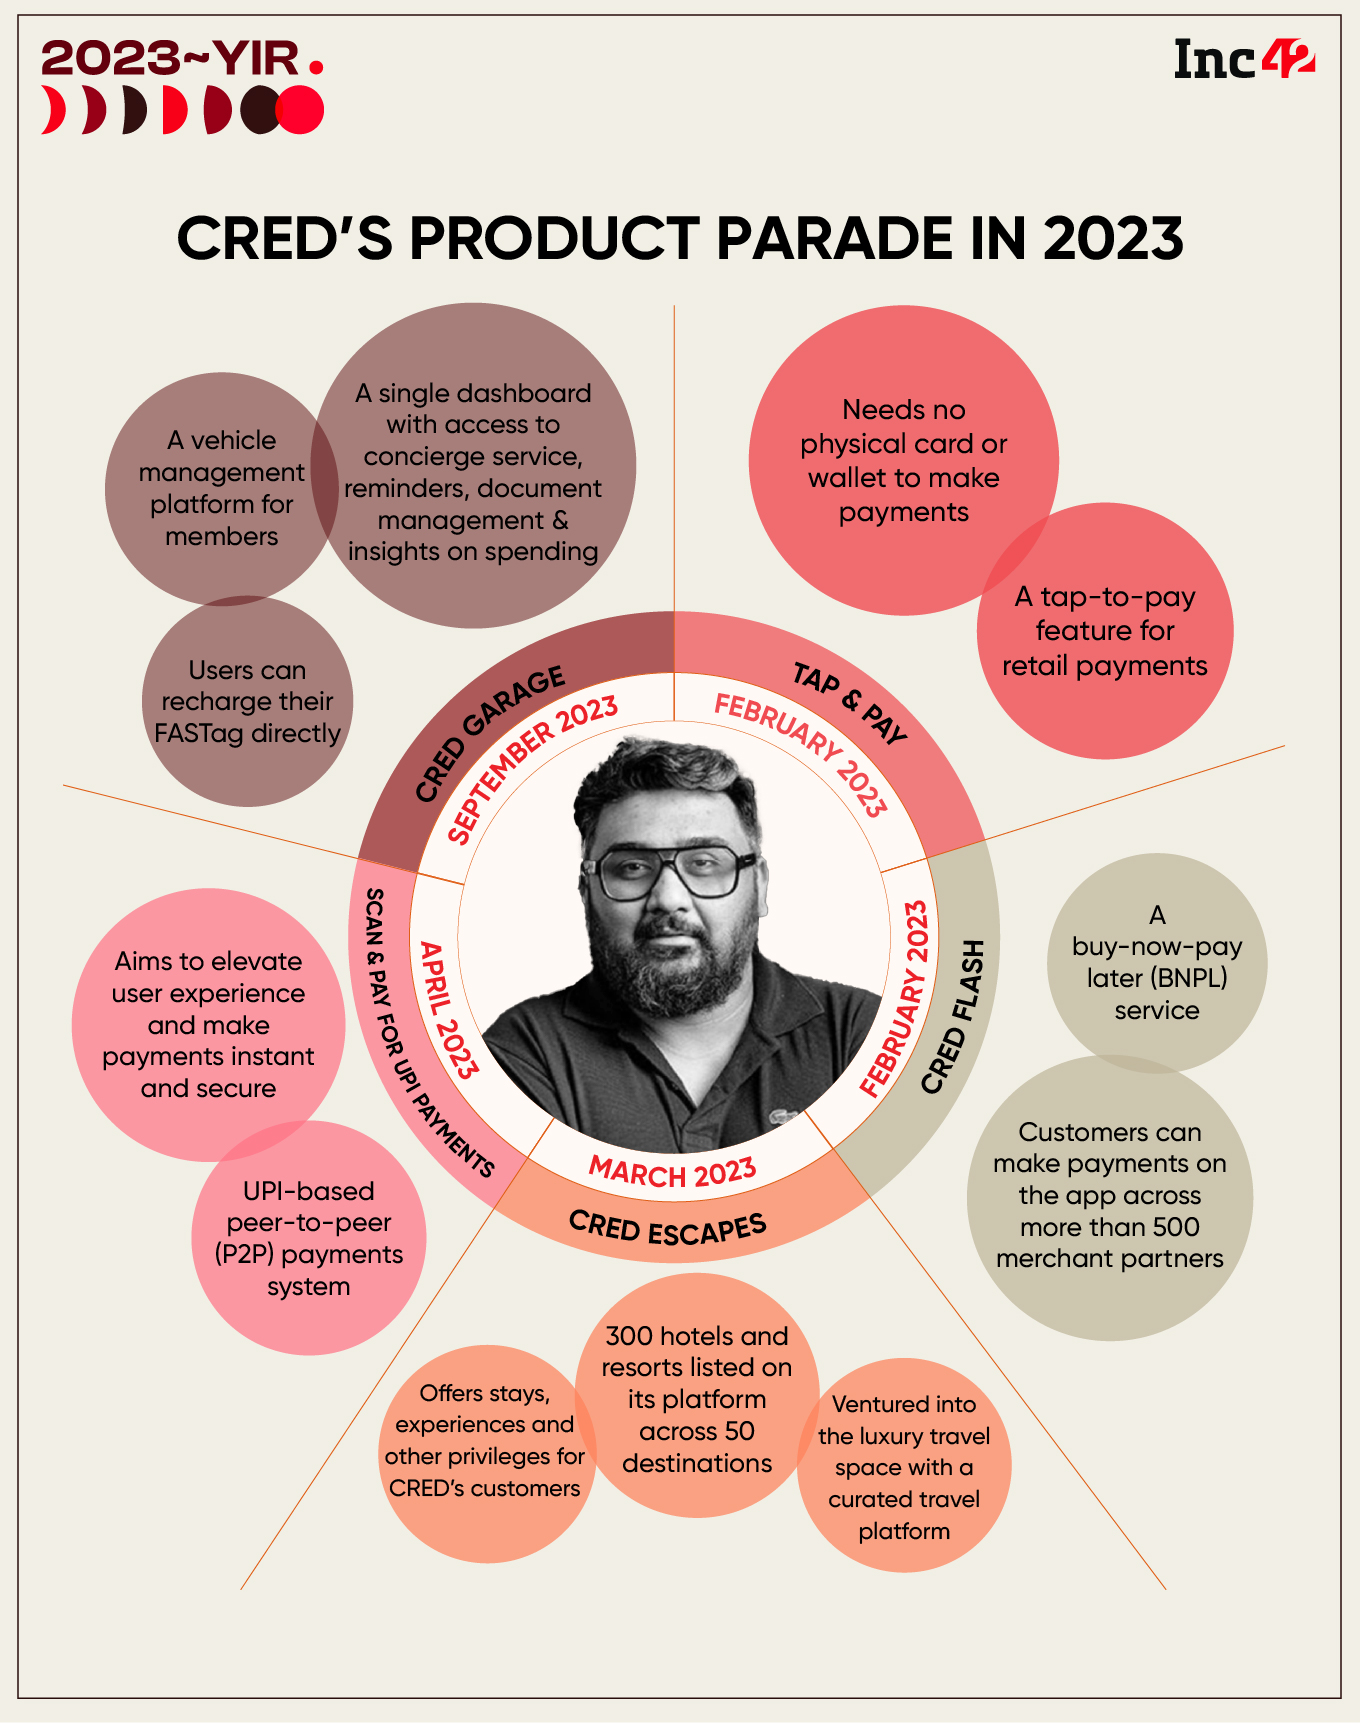 CRED’s Product Parade In 2023